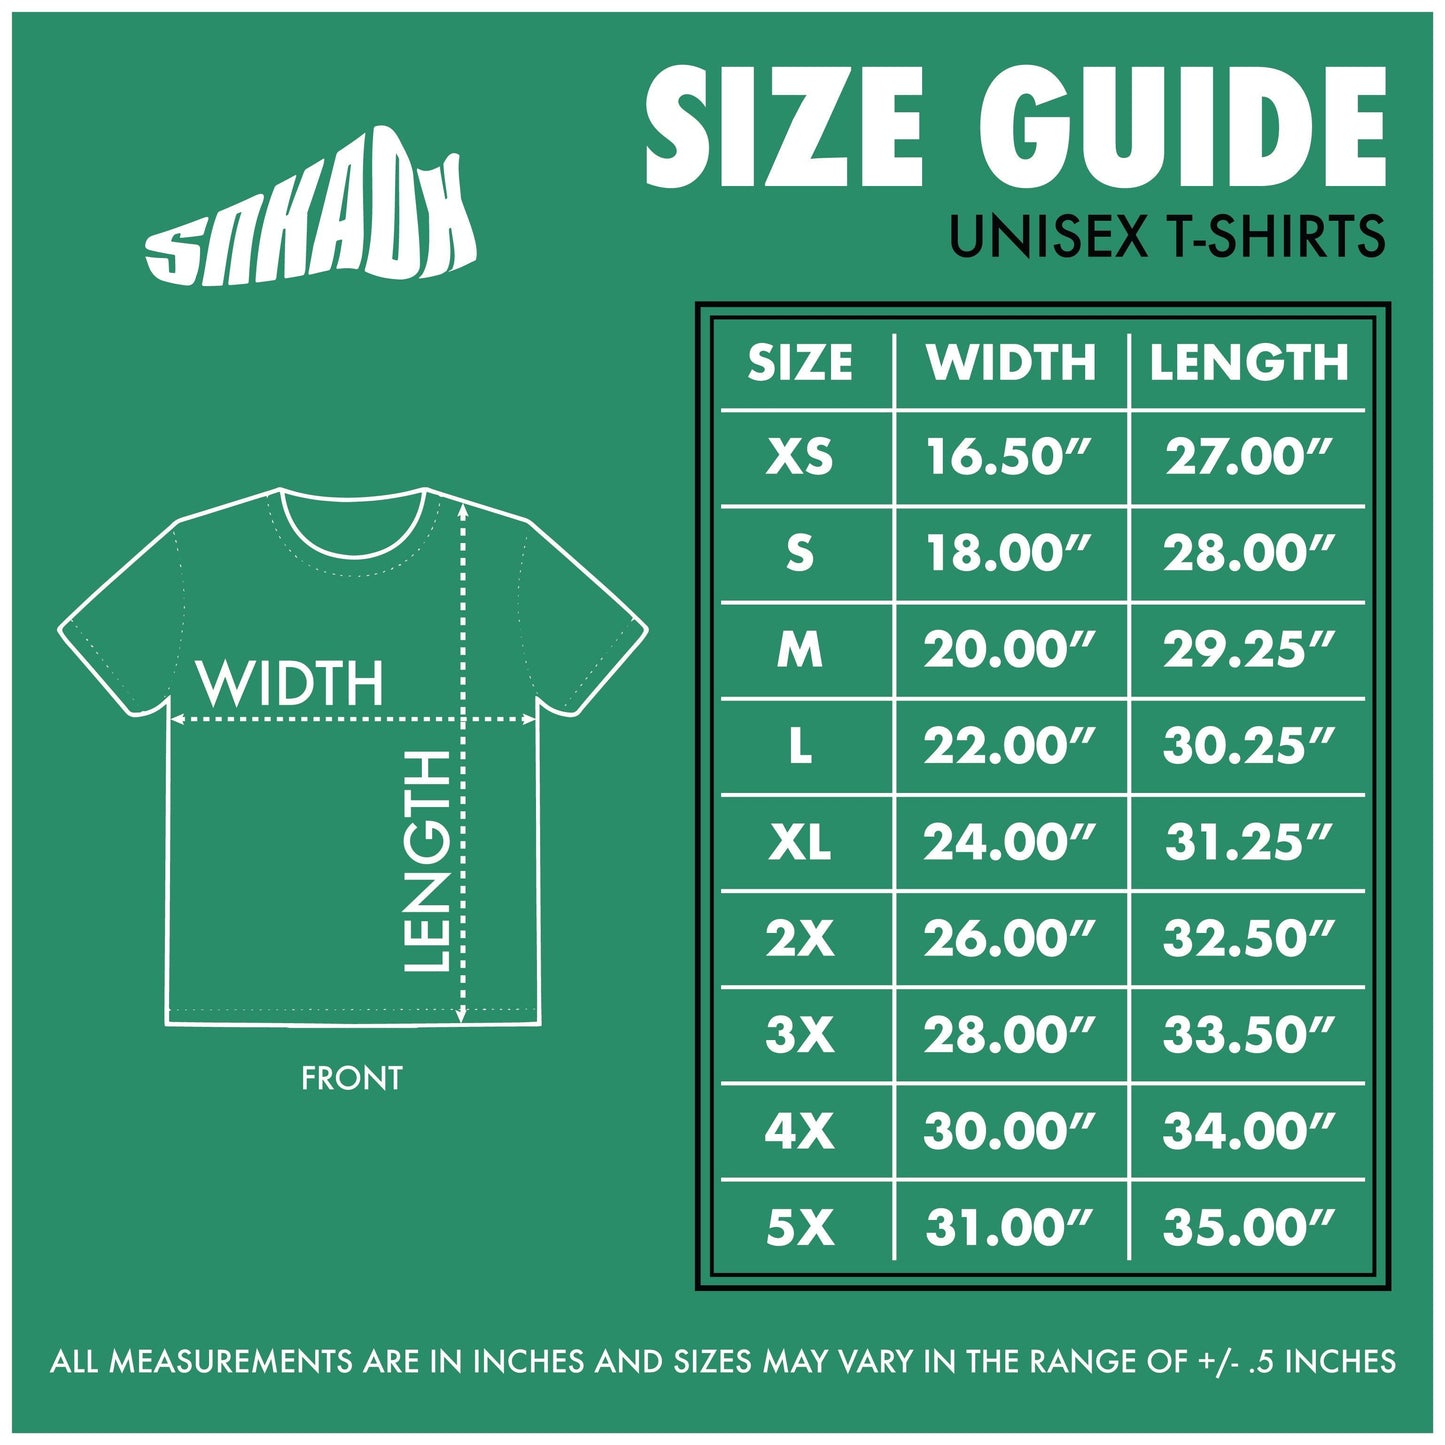 thsirt size guides